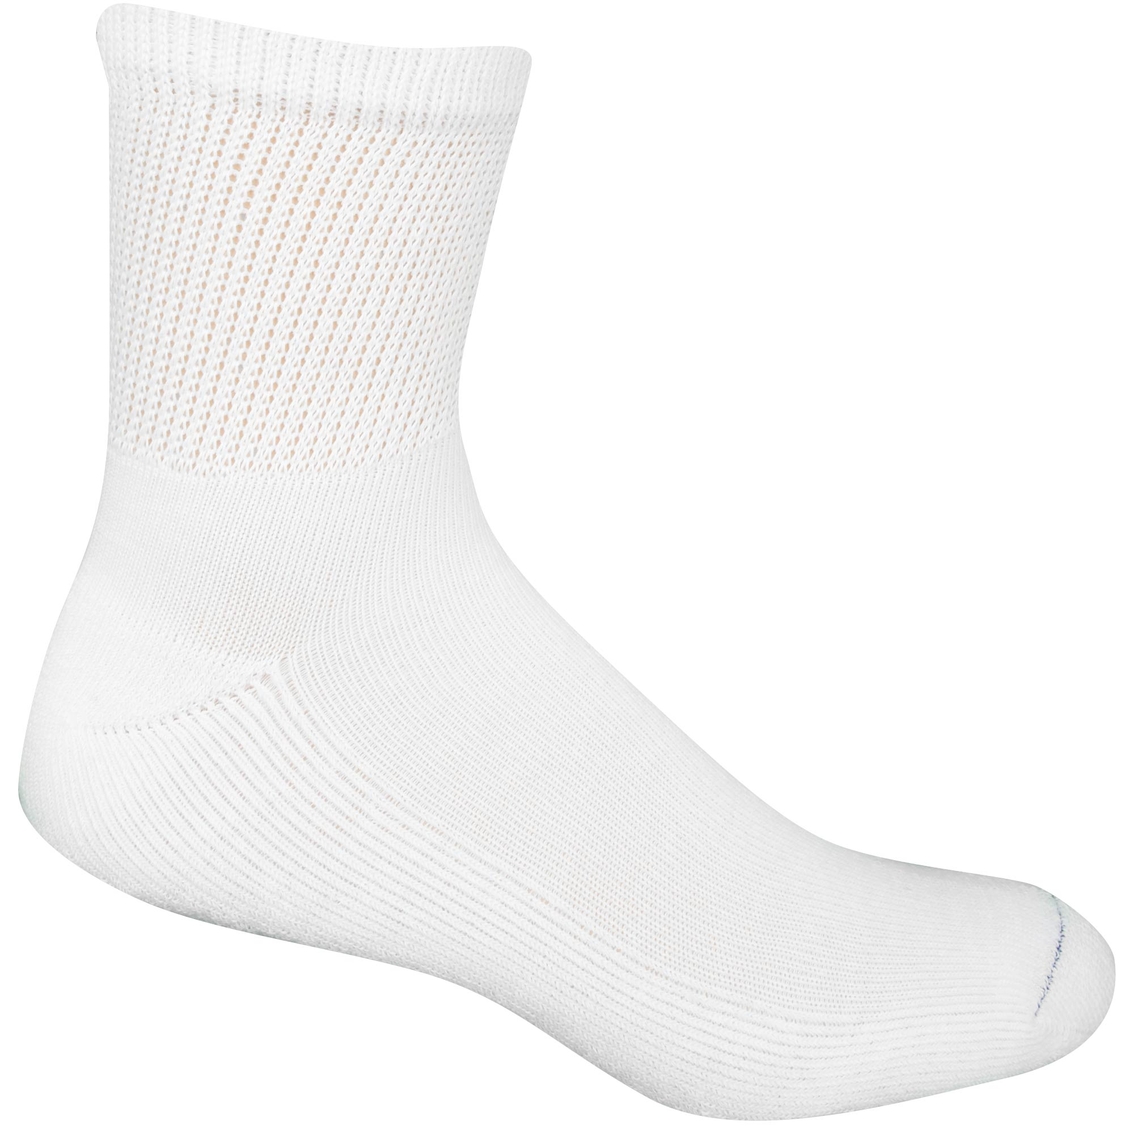 Dr. Scholl's Diabetic and Circulatory Ankle Socks 4 Pk.